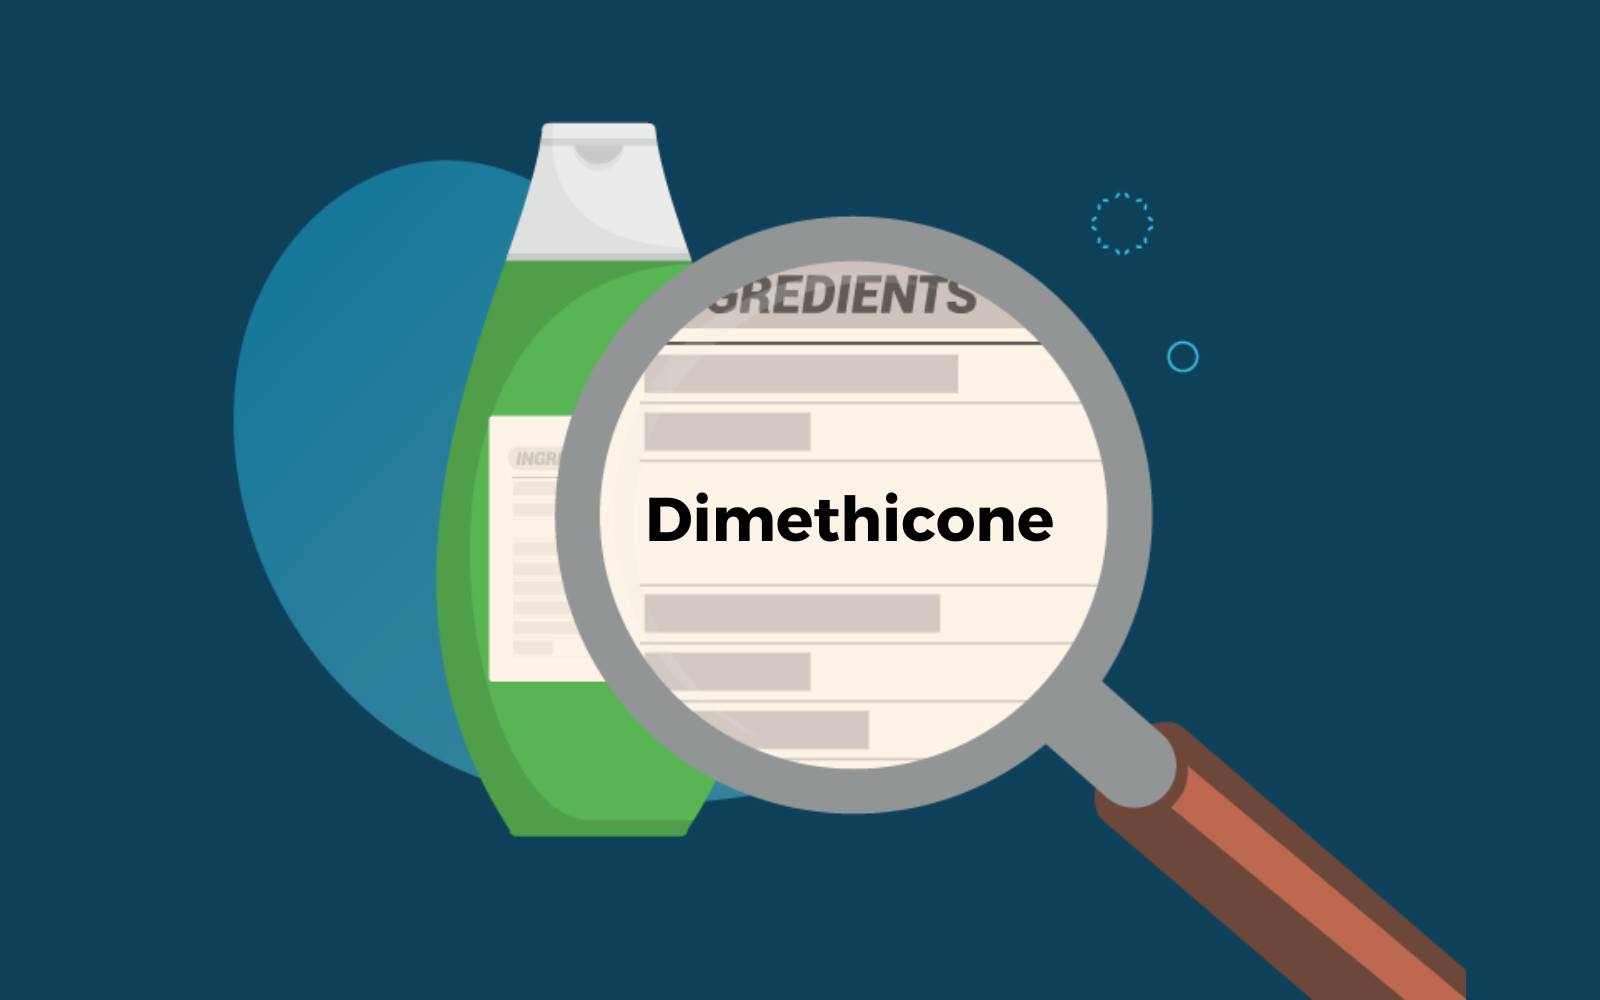 Is Dimethicone Bad for Hair? | Not Always